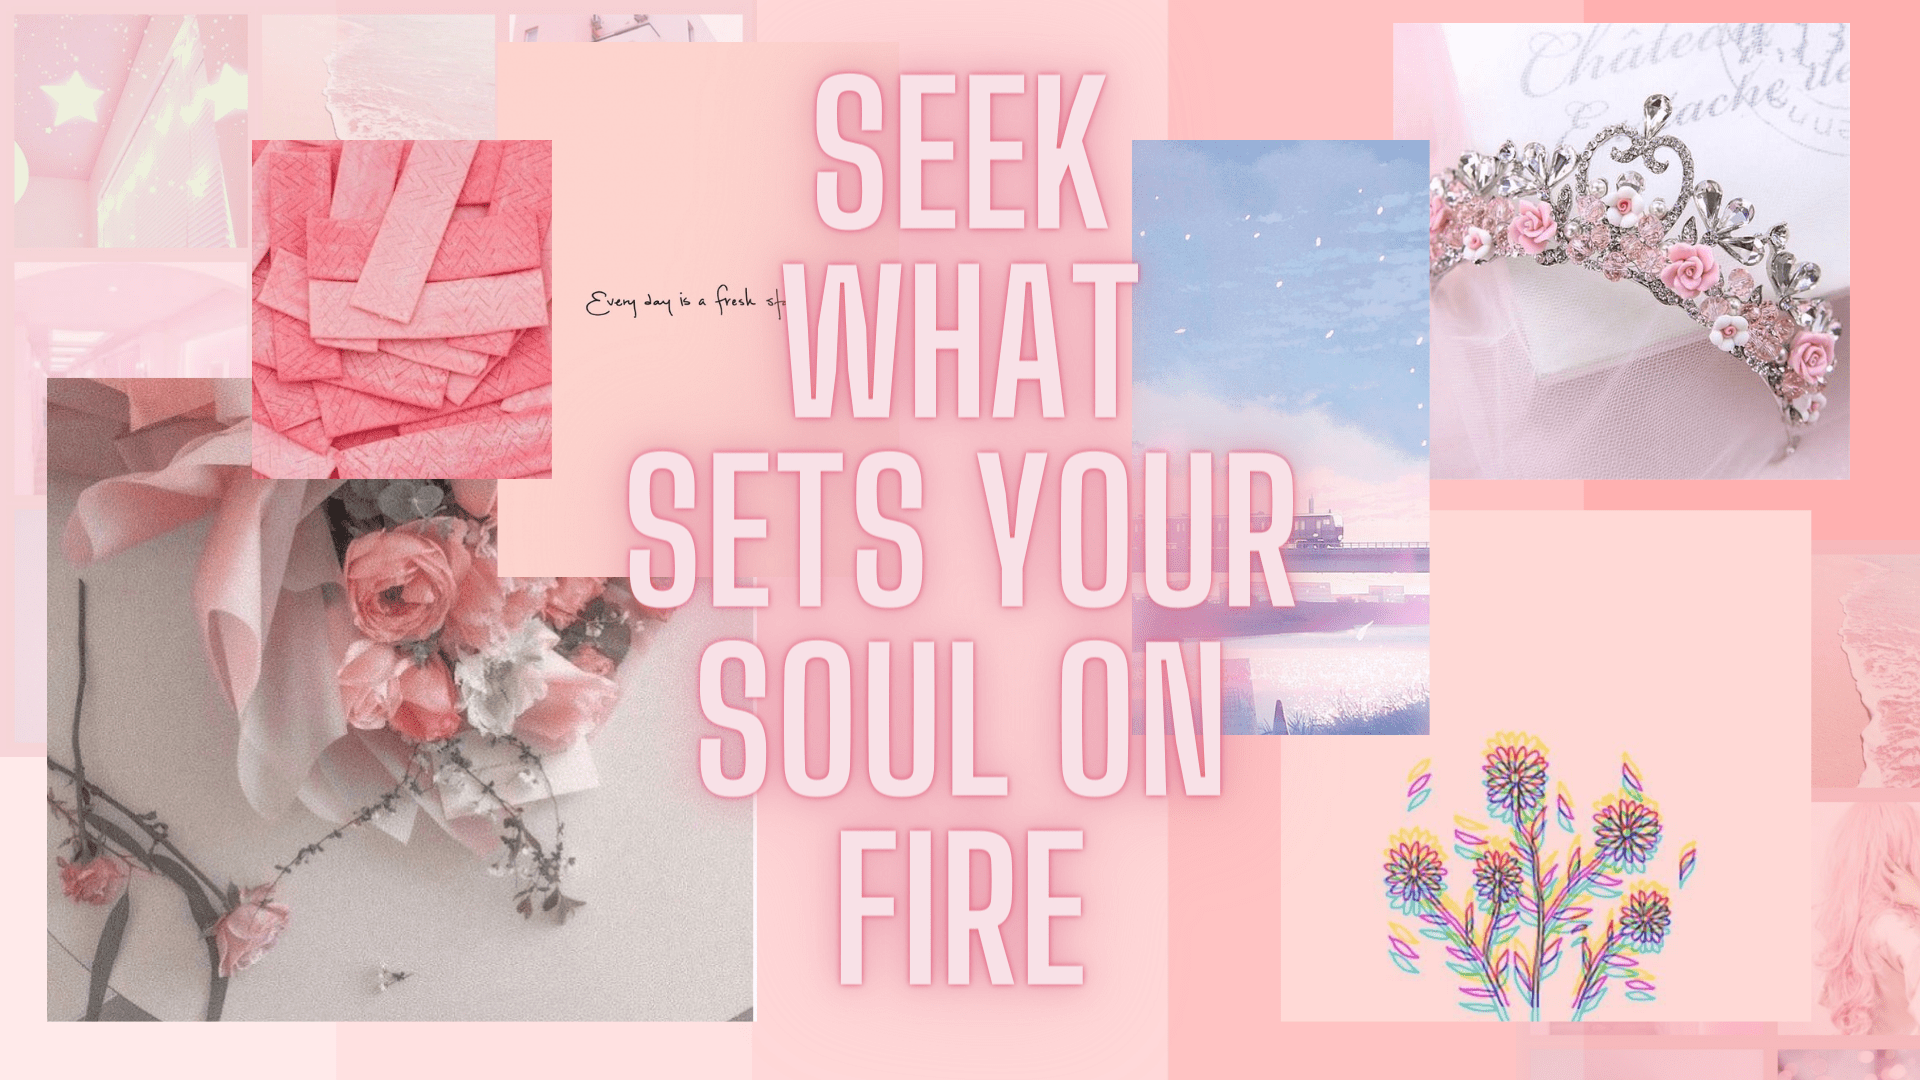 Seek what sets your soul on fire - Pastel